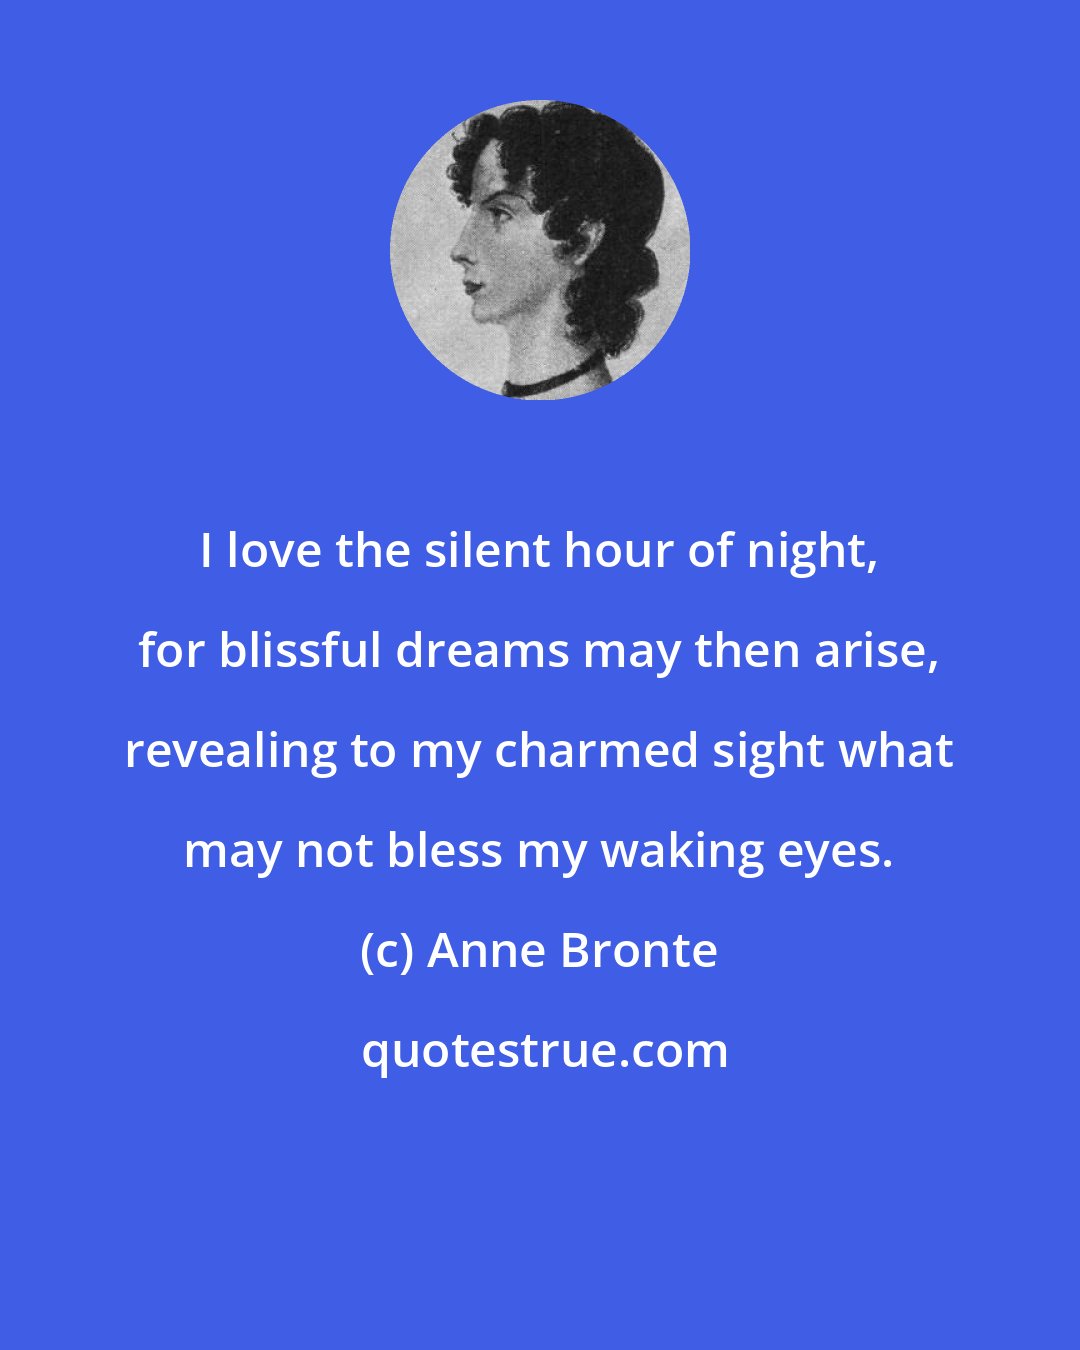 Anne Bronte: I love the silent hour of night, for blissful dreams may then arise, revealing to my charmed sight what may not bless my waking eyes.